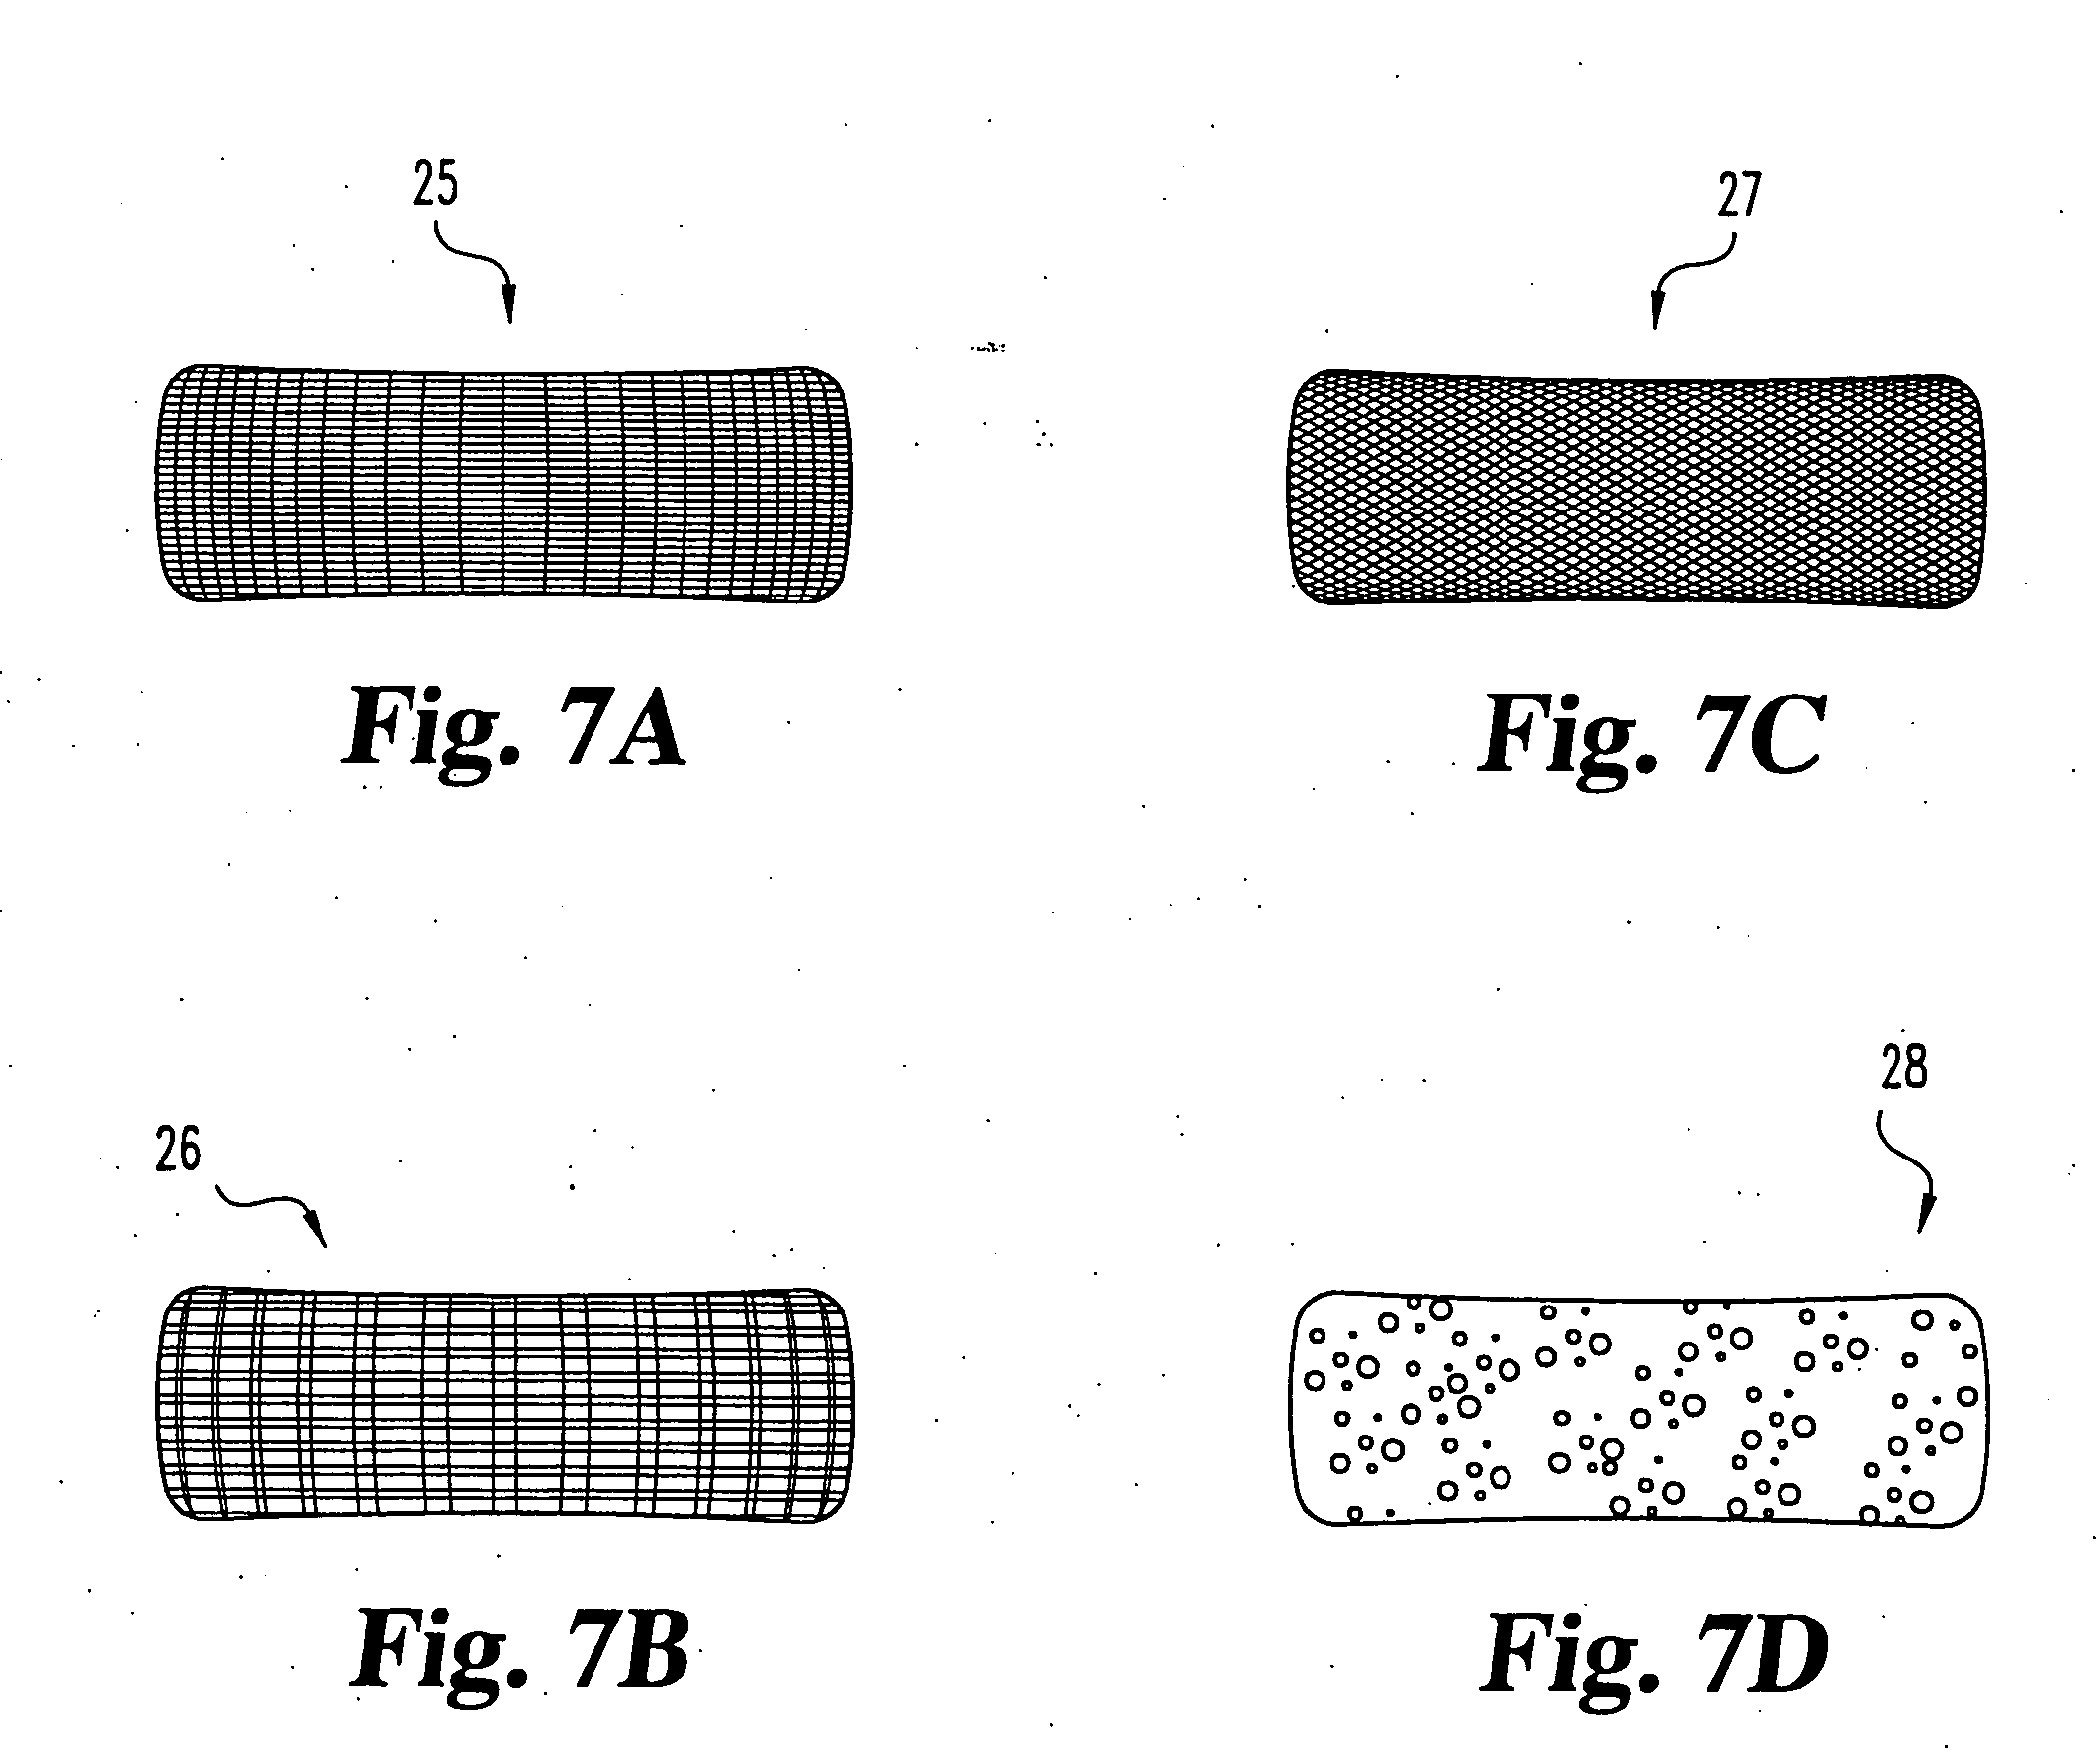 Spinal nucleus replacement implants and methods